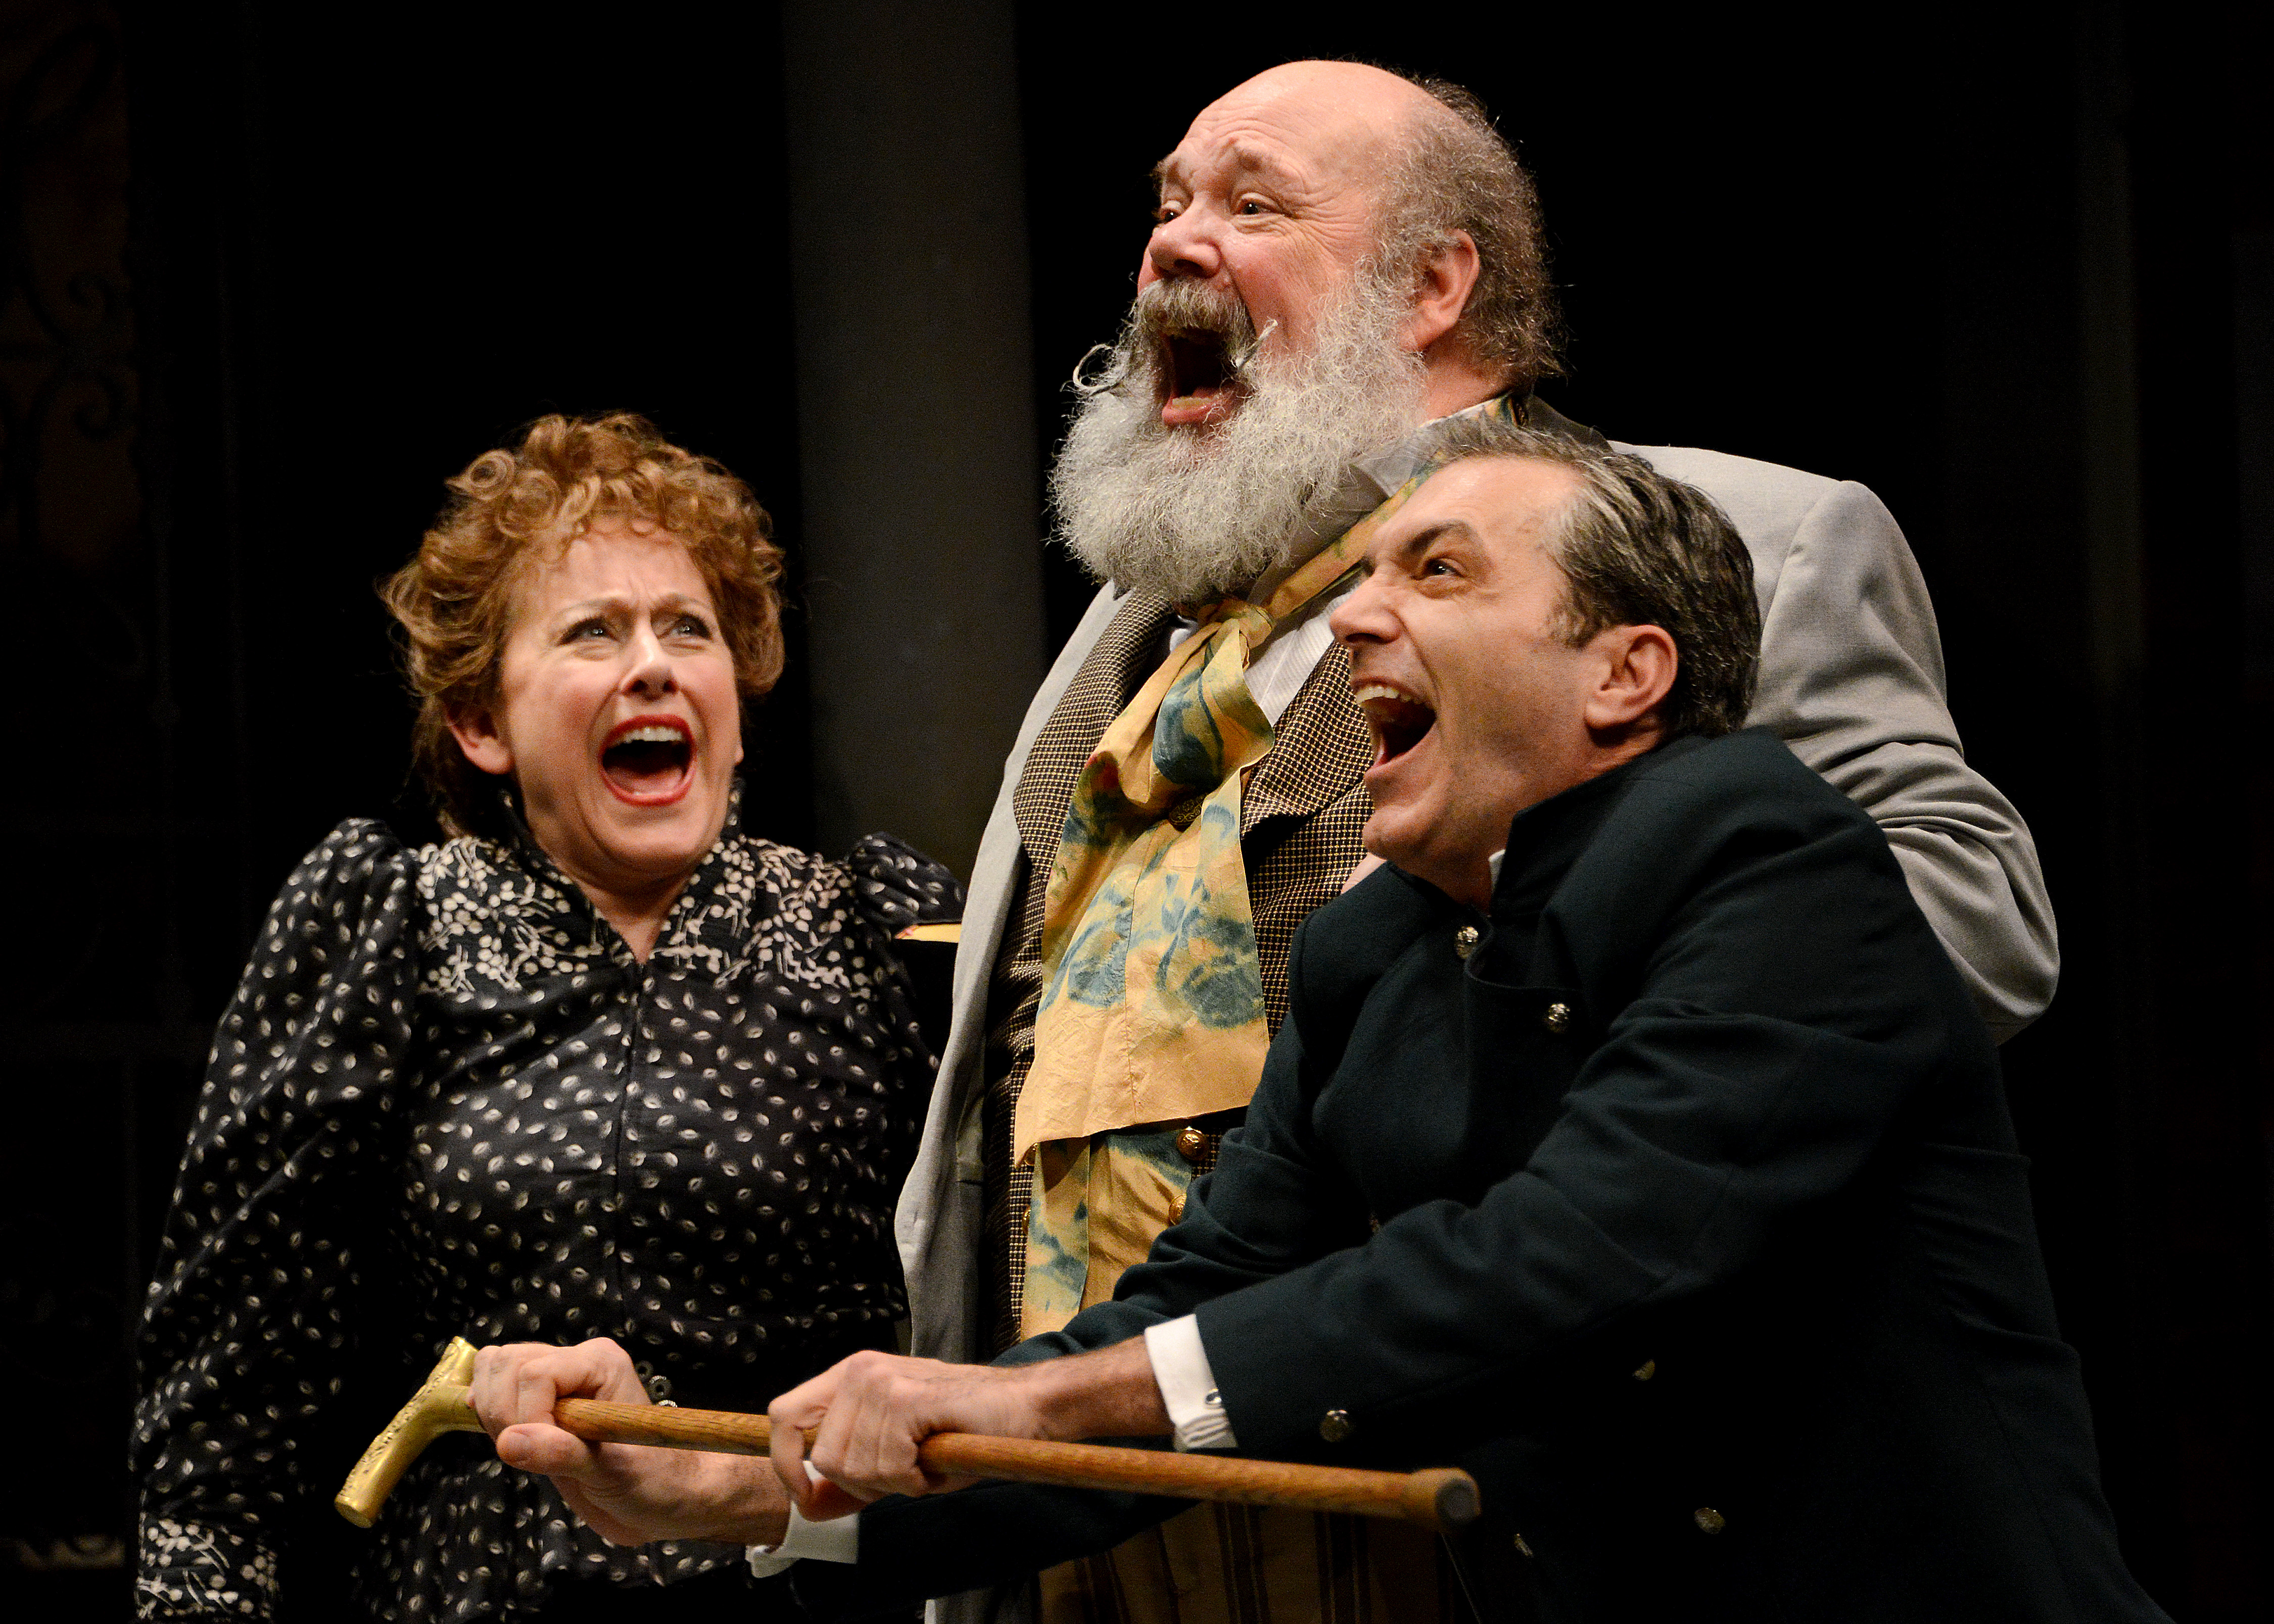 Maria, Sir Toby, and Fabian (Helena Ruoti, John Ahlin, Tony Bingham) can't believe how silly things get, and they are expert practitioners themselves.